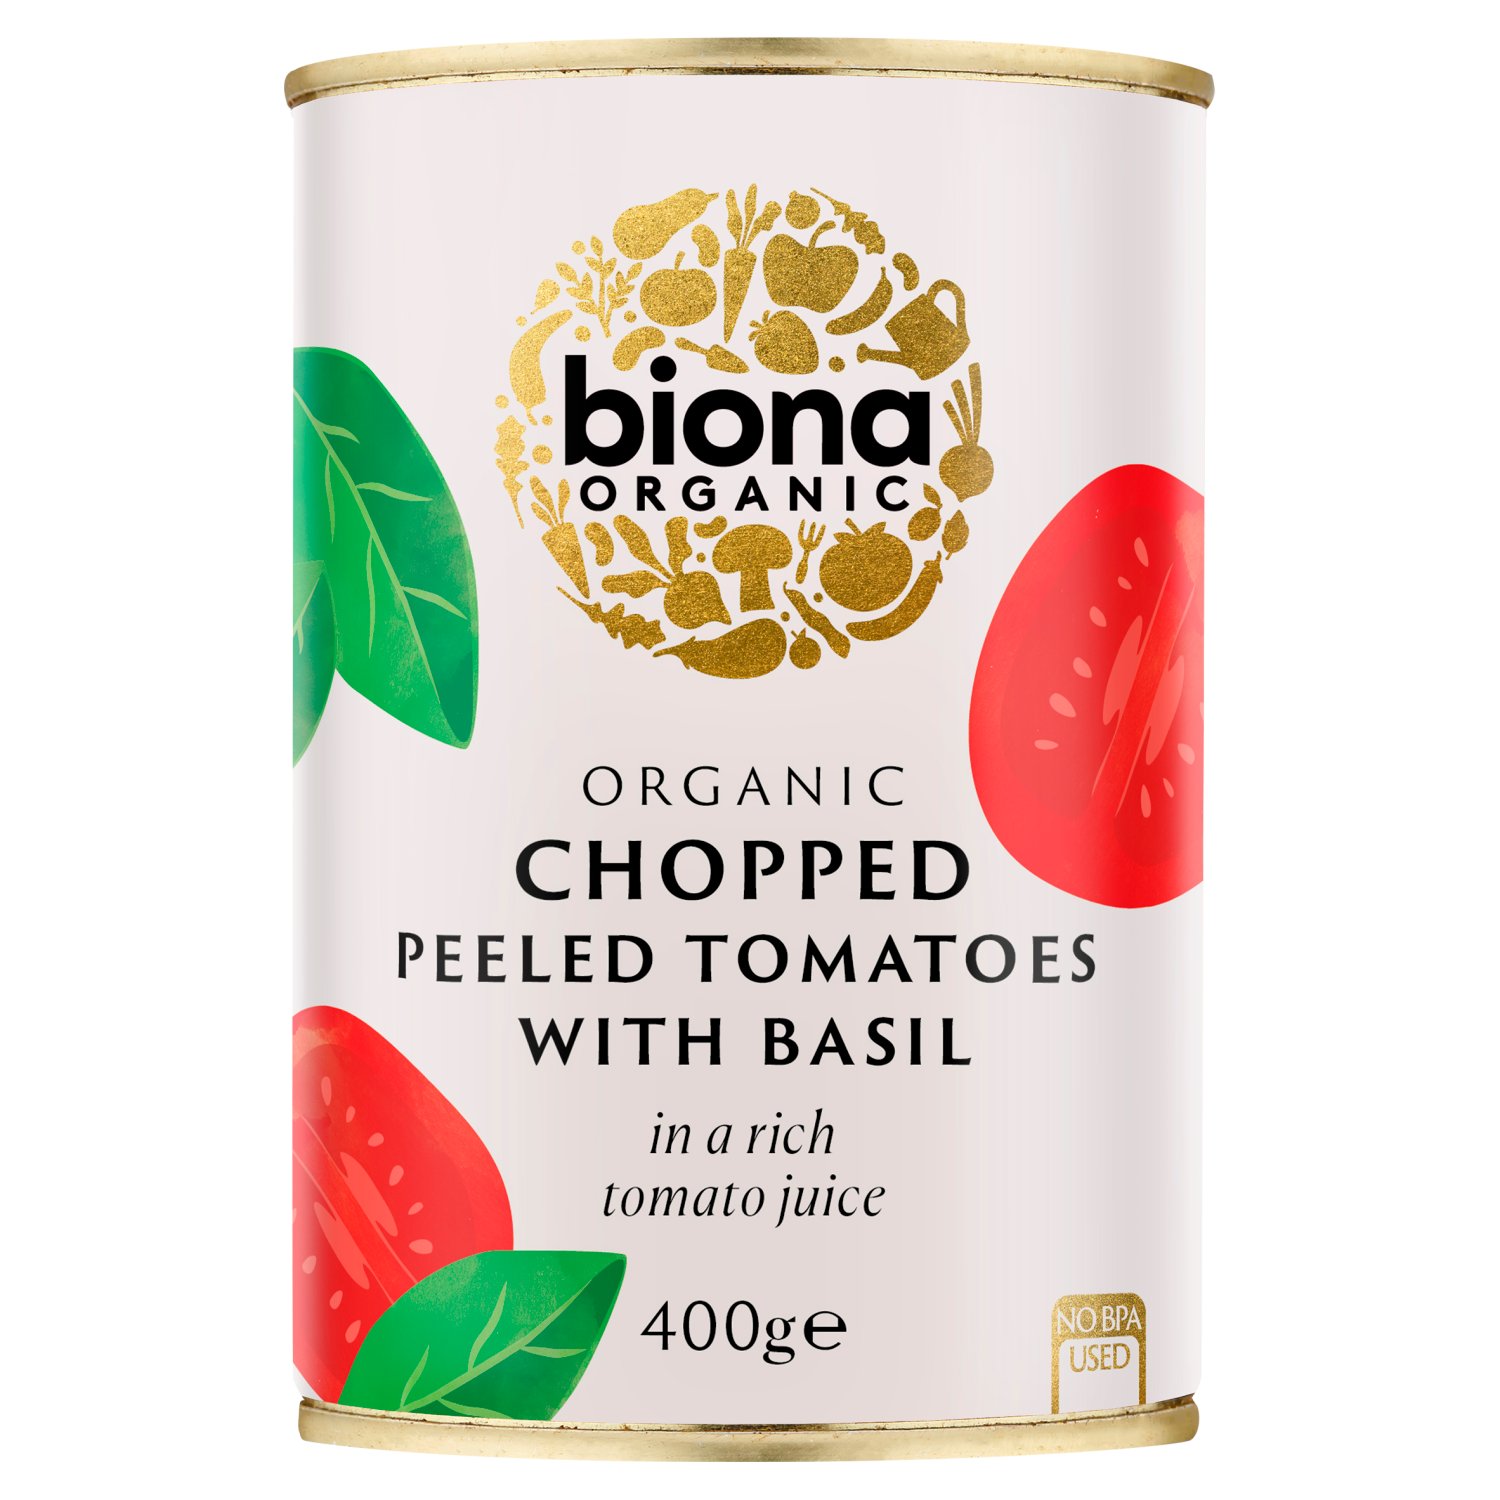 Biona: 25 years of organic food
- Certified Organic & GMO Free
- Suitable for Vegans
- BPA Free
- No Air Miles
- Ethically & Sustainably Sourced
- Made from Sun-Ripened Italian Tomatoes
- Family Business

These organic tomatoes are chosen for their sun-ripened goodness. They are simply chopped, mixed with fresh basil and then marinated in a rich tomato juice. Our tomatoes have no added salt or sugar and are citric acid free too! All our tomatoes are grown on farms selected for their premium organic crops and their sustainable farming methods.

Our tomato range is produced in Italy and comes from a sustainable farm run by farmers who are committed to avoiding harmful chemicals, pesticides and fertilizers and who shun genetic modification. The beautiful, warm Mediterranean sun that shines throughout the summer months ripens the fruits to perfection. The crop is harvested from July to the end of August, when they are at their very best.